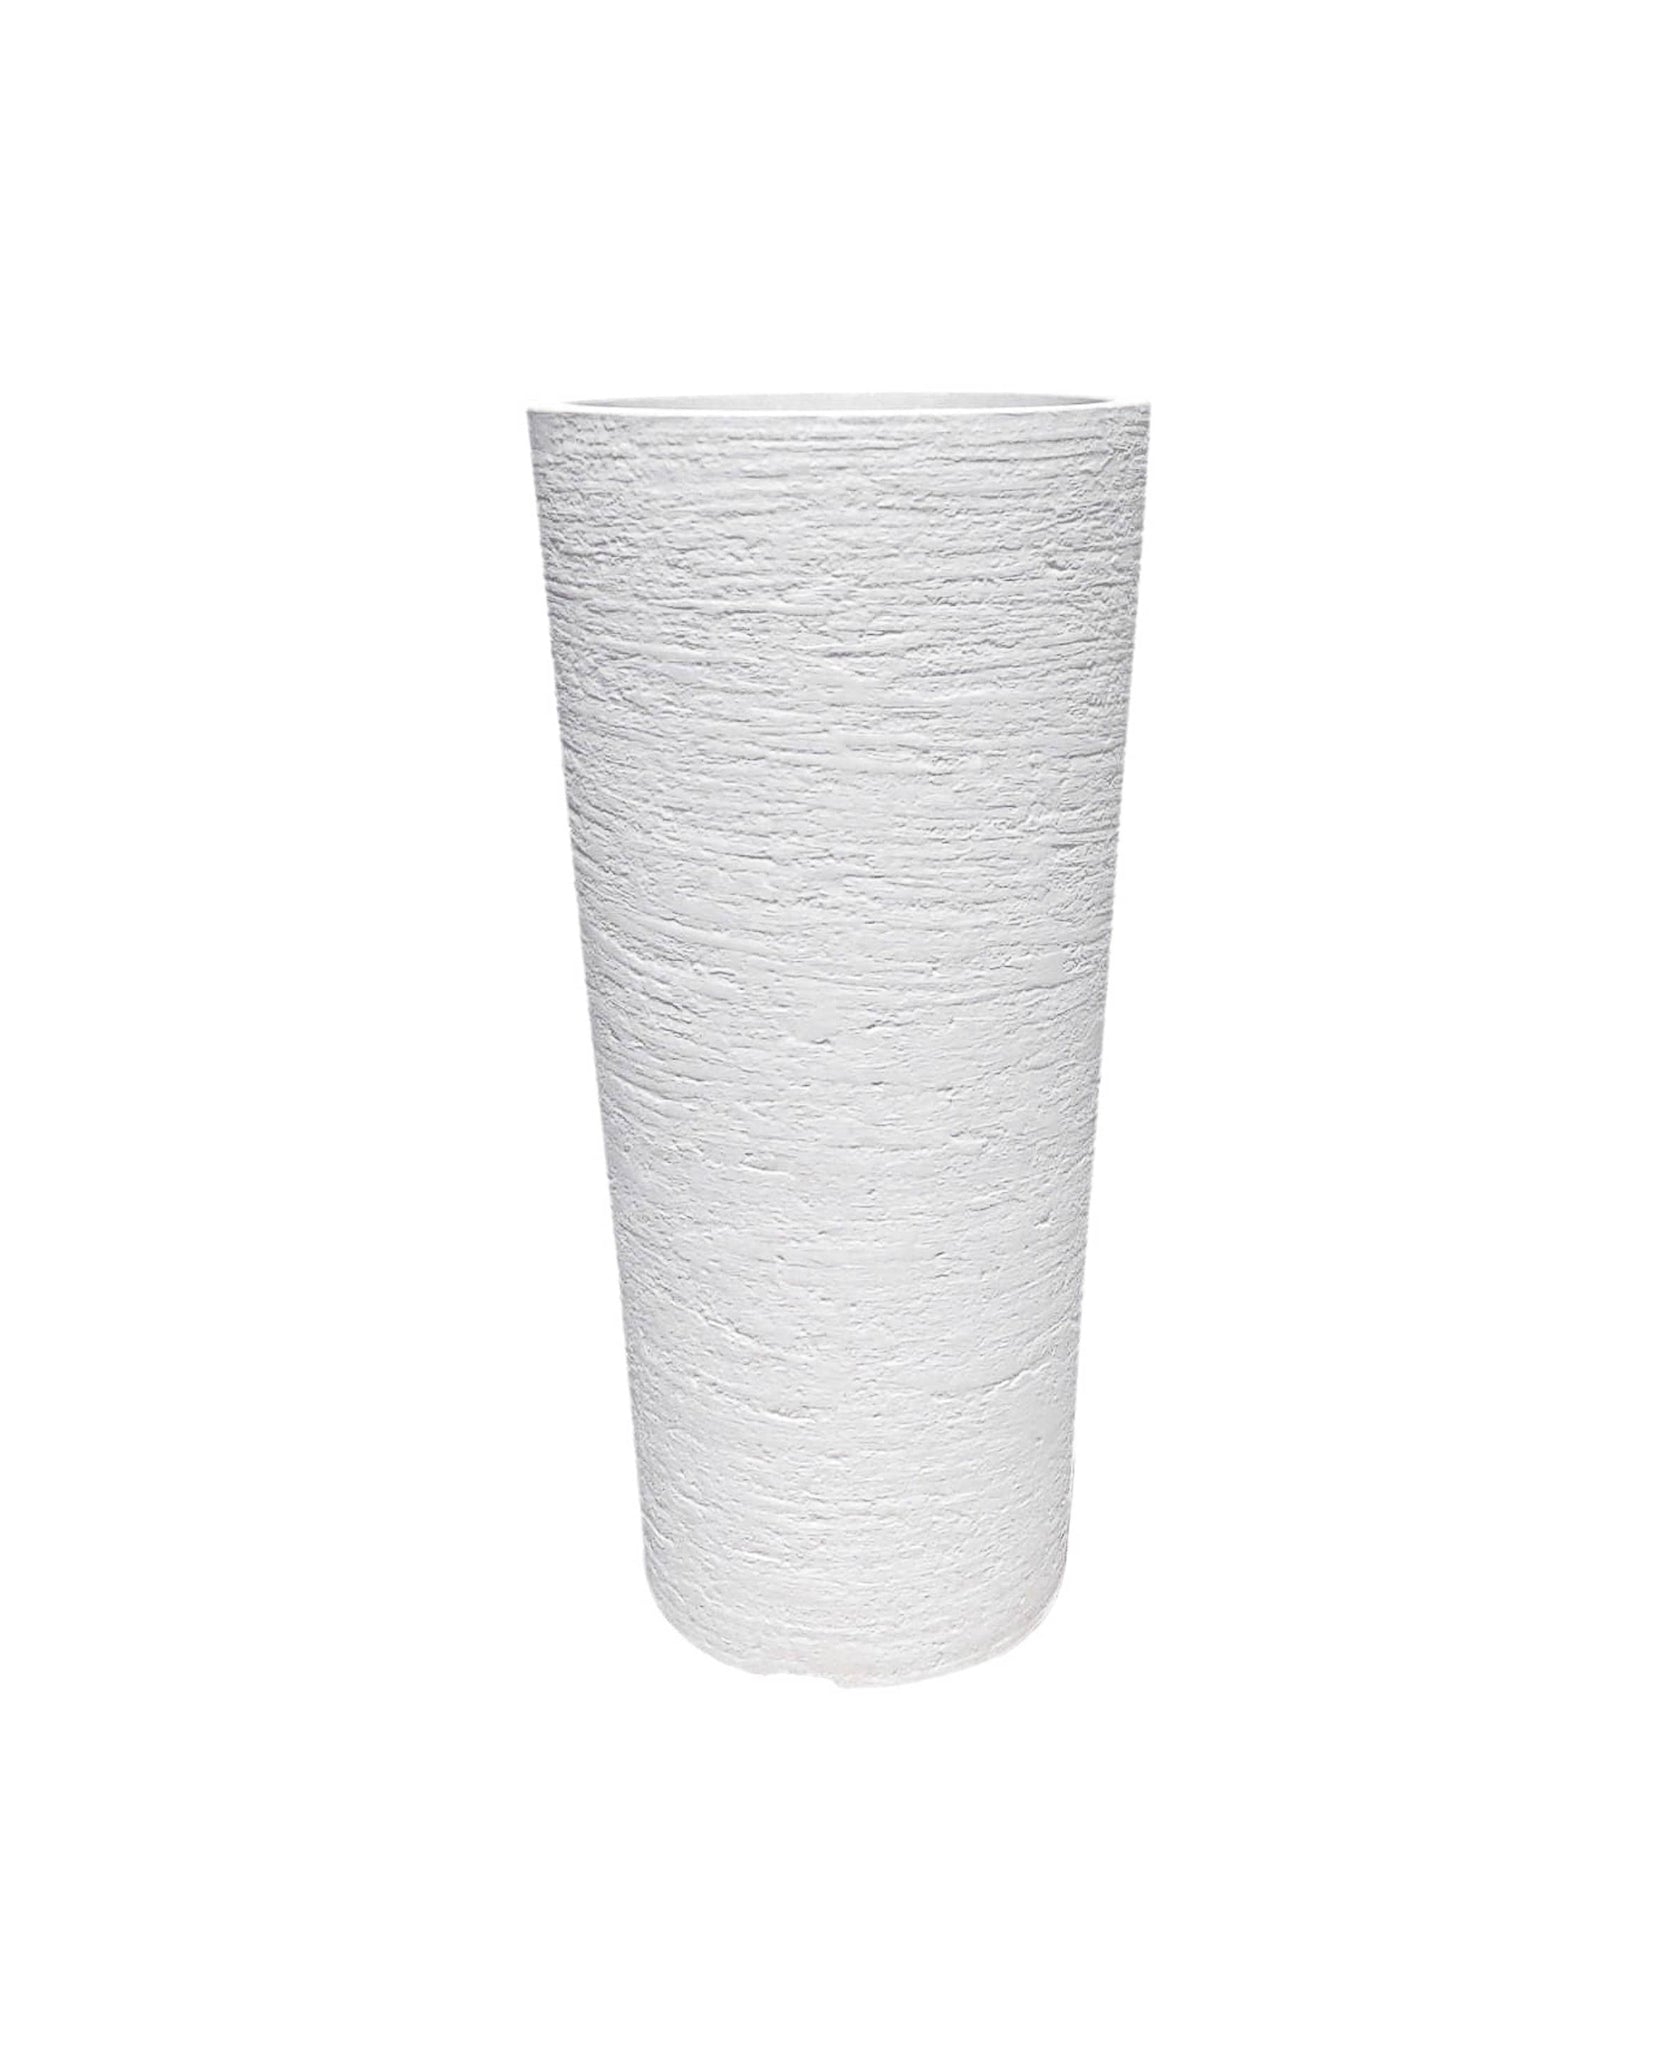 Meduim Tall plant pot, slim with a textured finish. The European Conic Japi planter shown in the colour Off White, is suitable with any style of decor. Fits in to narrow spaces. Florastyle by Hingham.